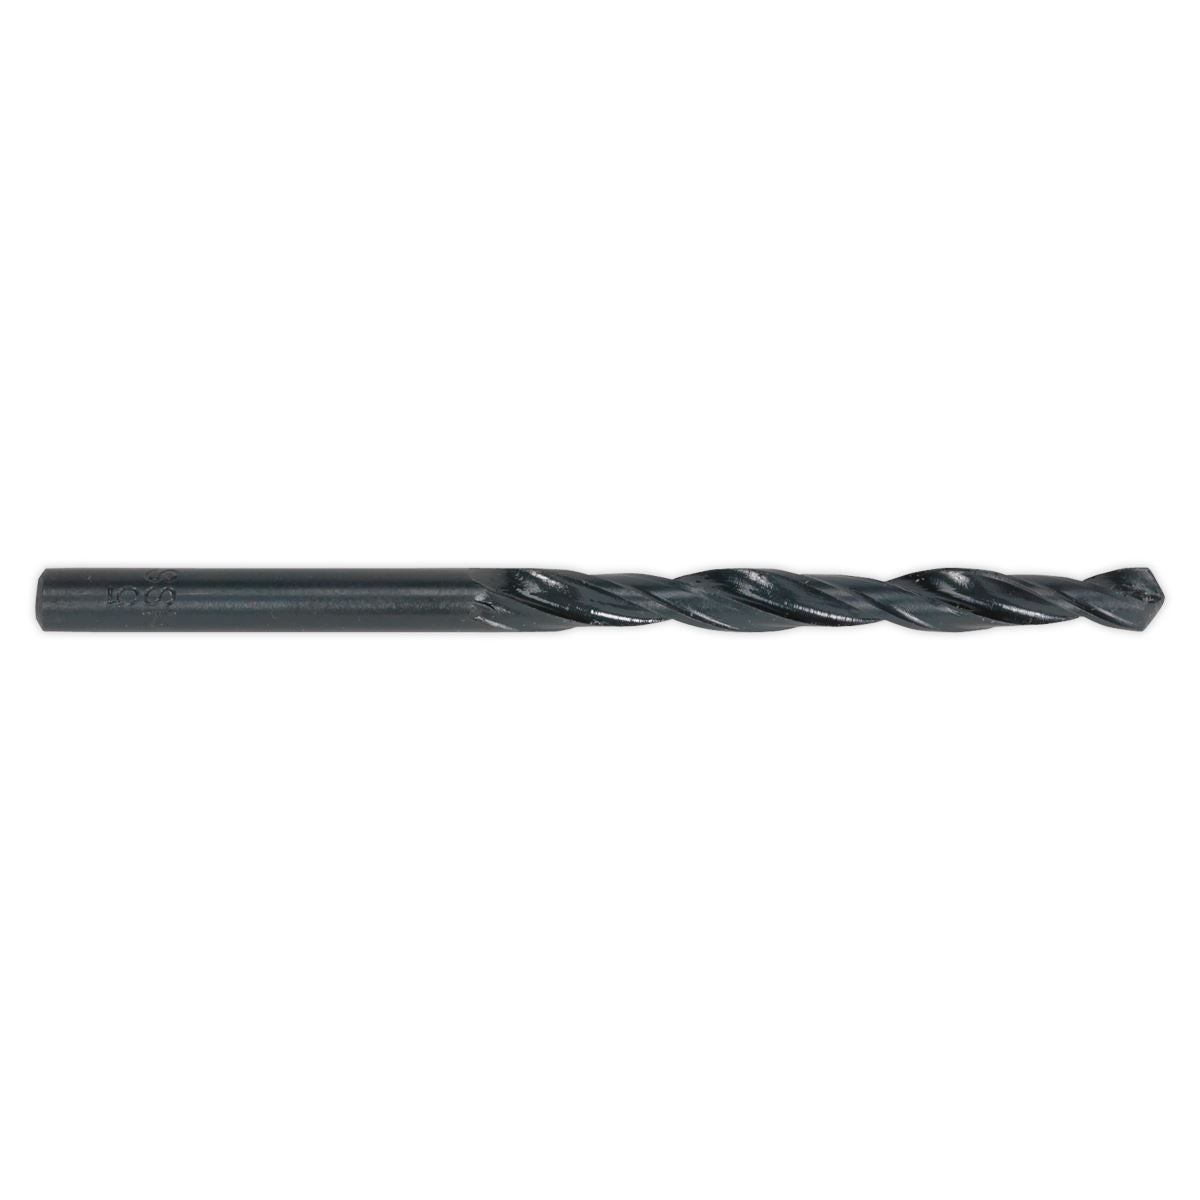 Sealey HSS Roll Forged Drill Bit Ø7mm Pack of 10